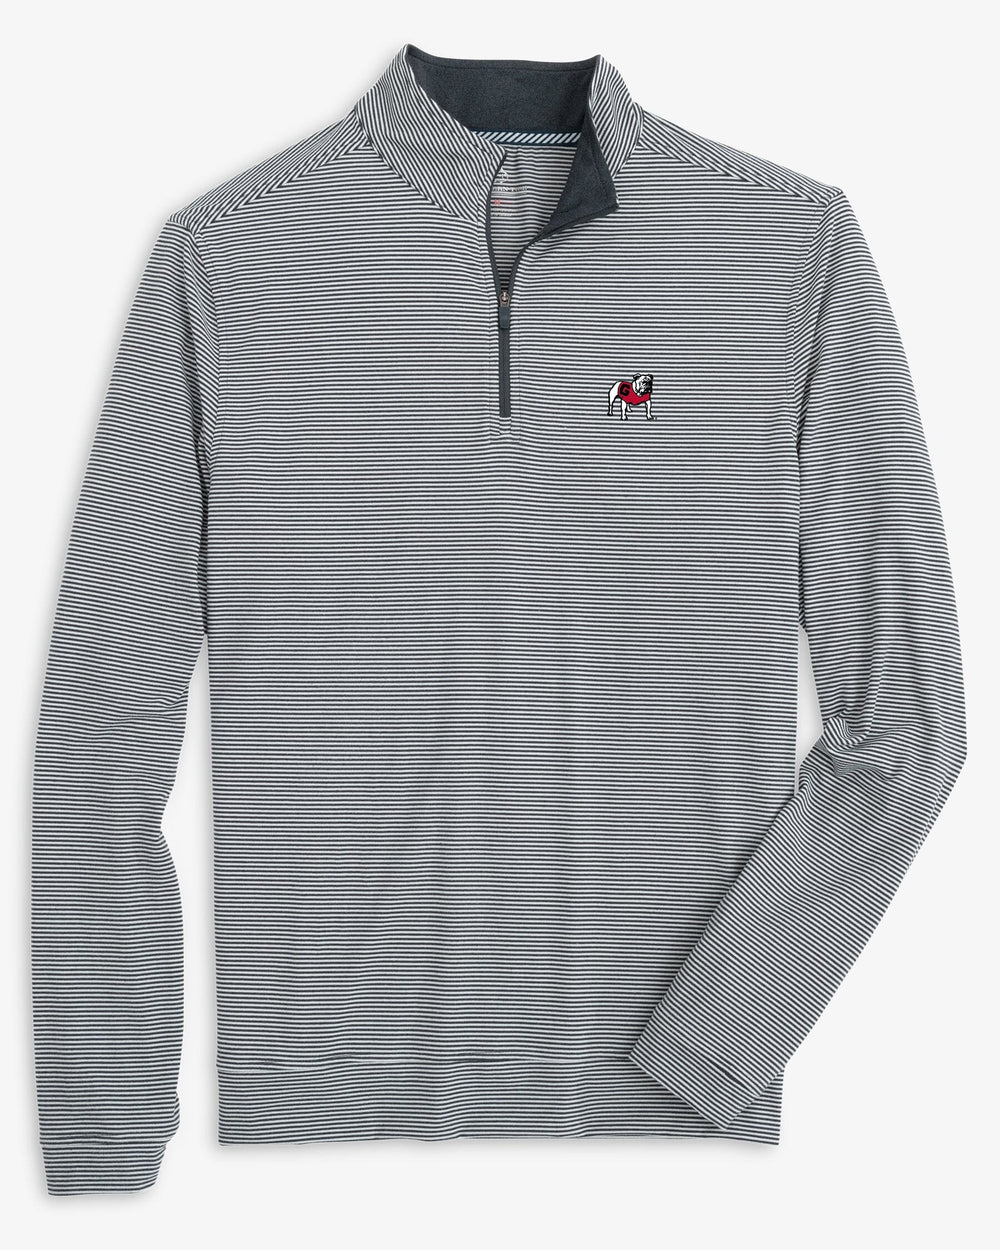 The front view of the Georgia Bulldogs Cruiser Micro-Stripe Heather Quarter Zip by Southern Tide - Heather Black